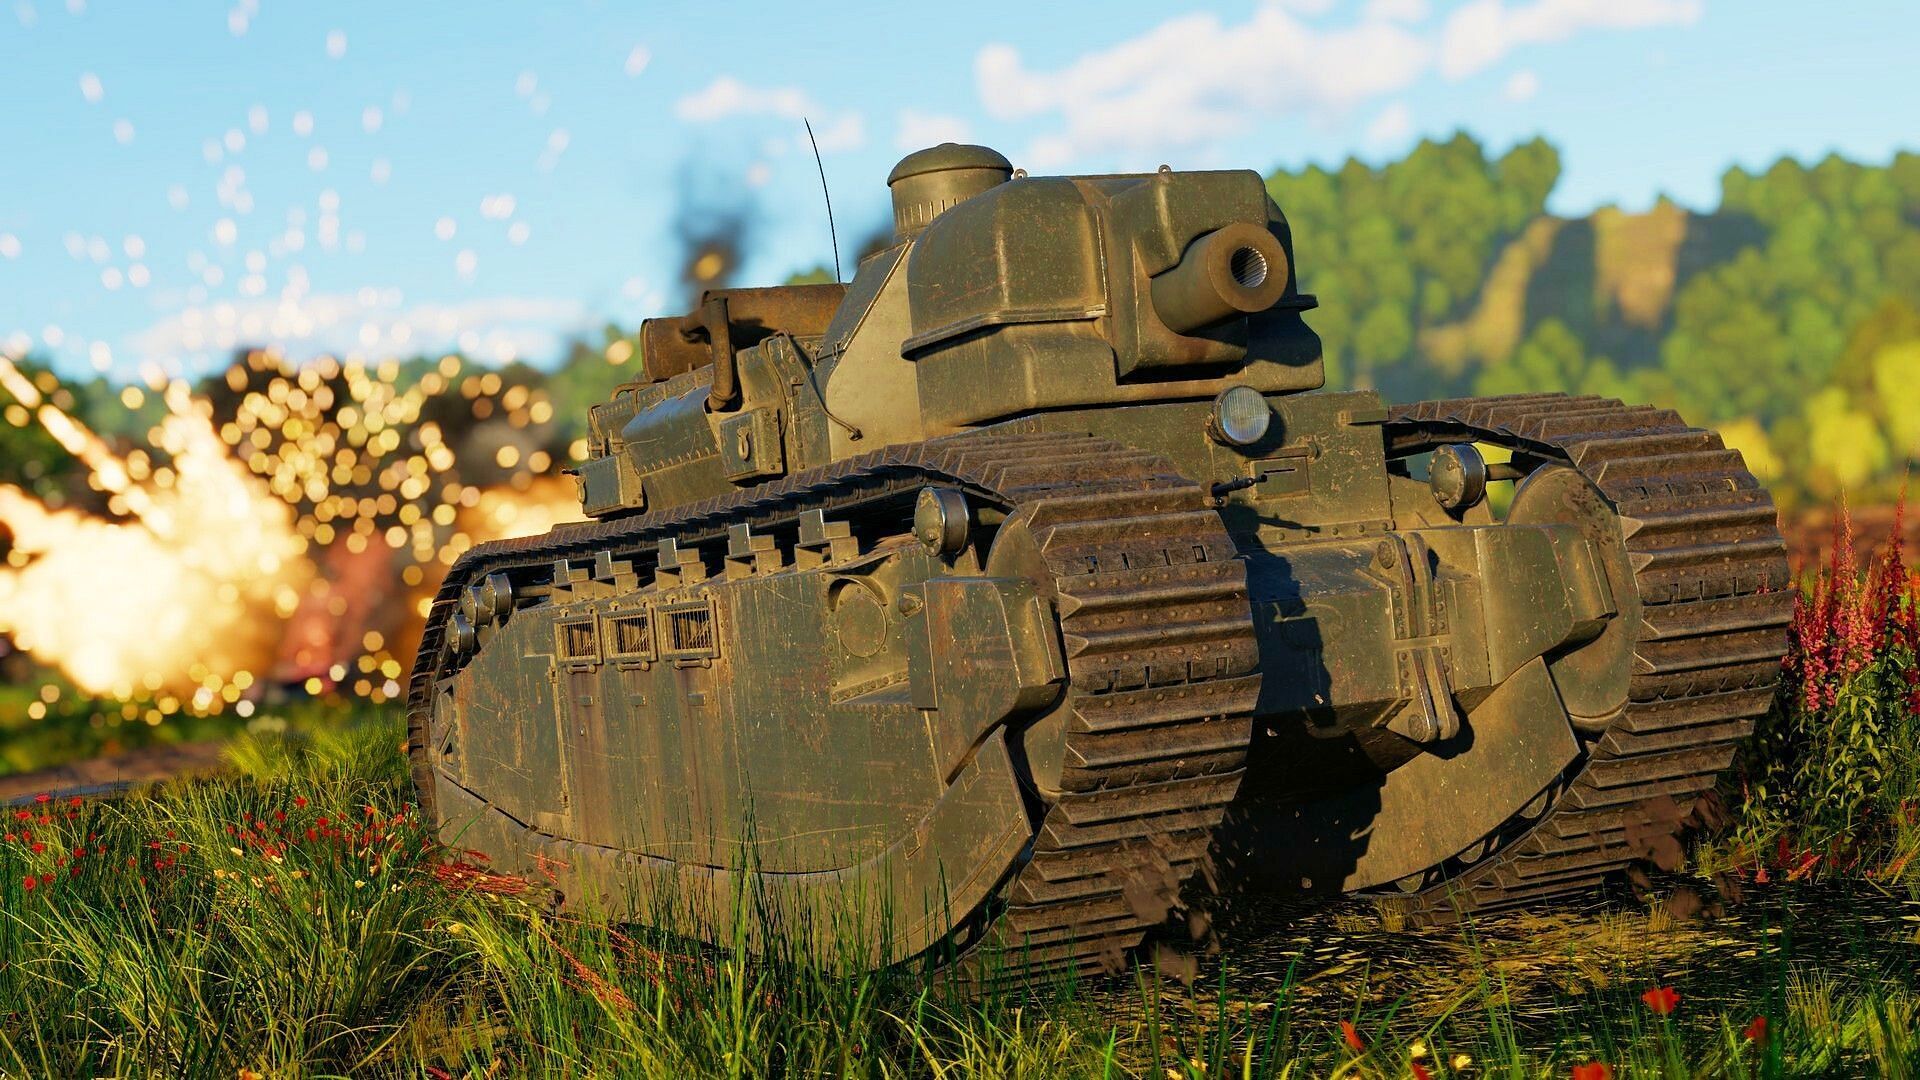 It is ideal to know everything about your tank (Image via War Thunder)